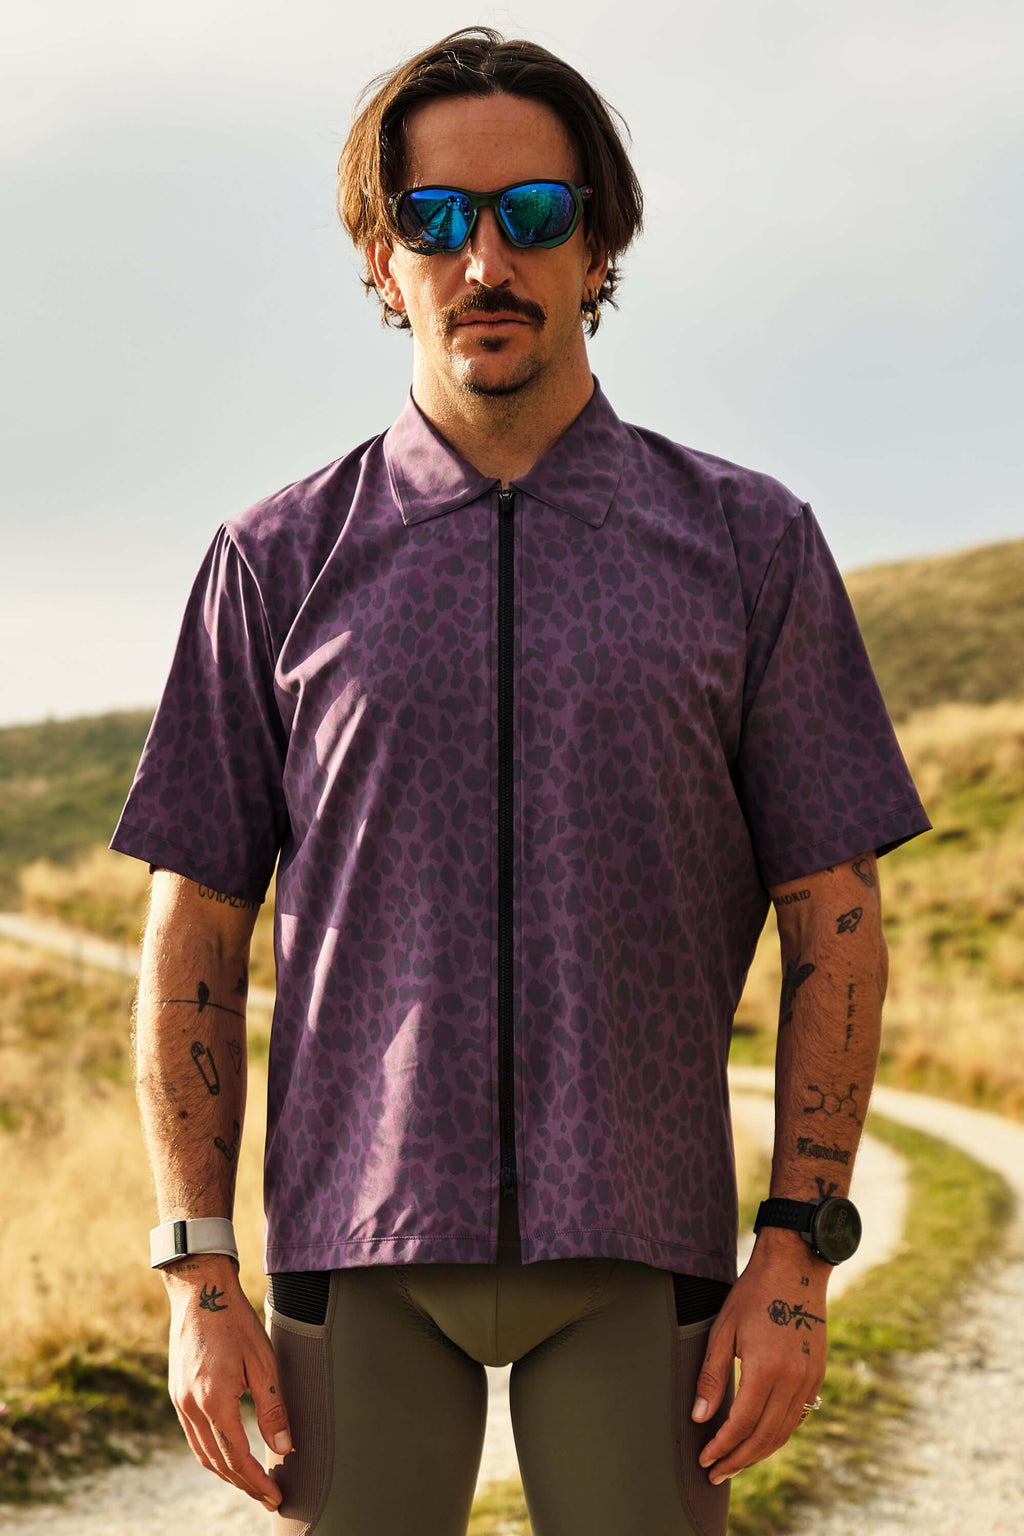 Beyond Gravel Soave Resort Shirt by Giordana Cycling, GRAPEADE, Made in Italy